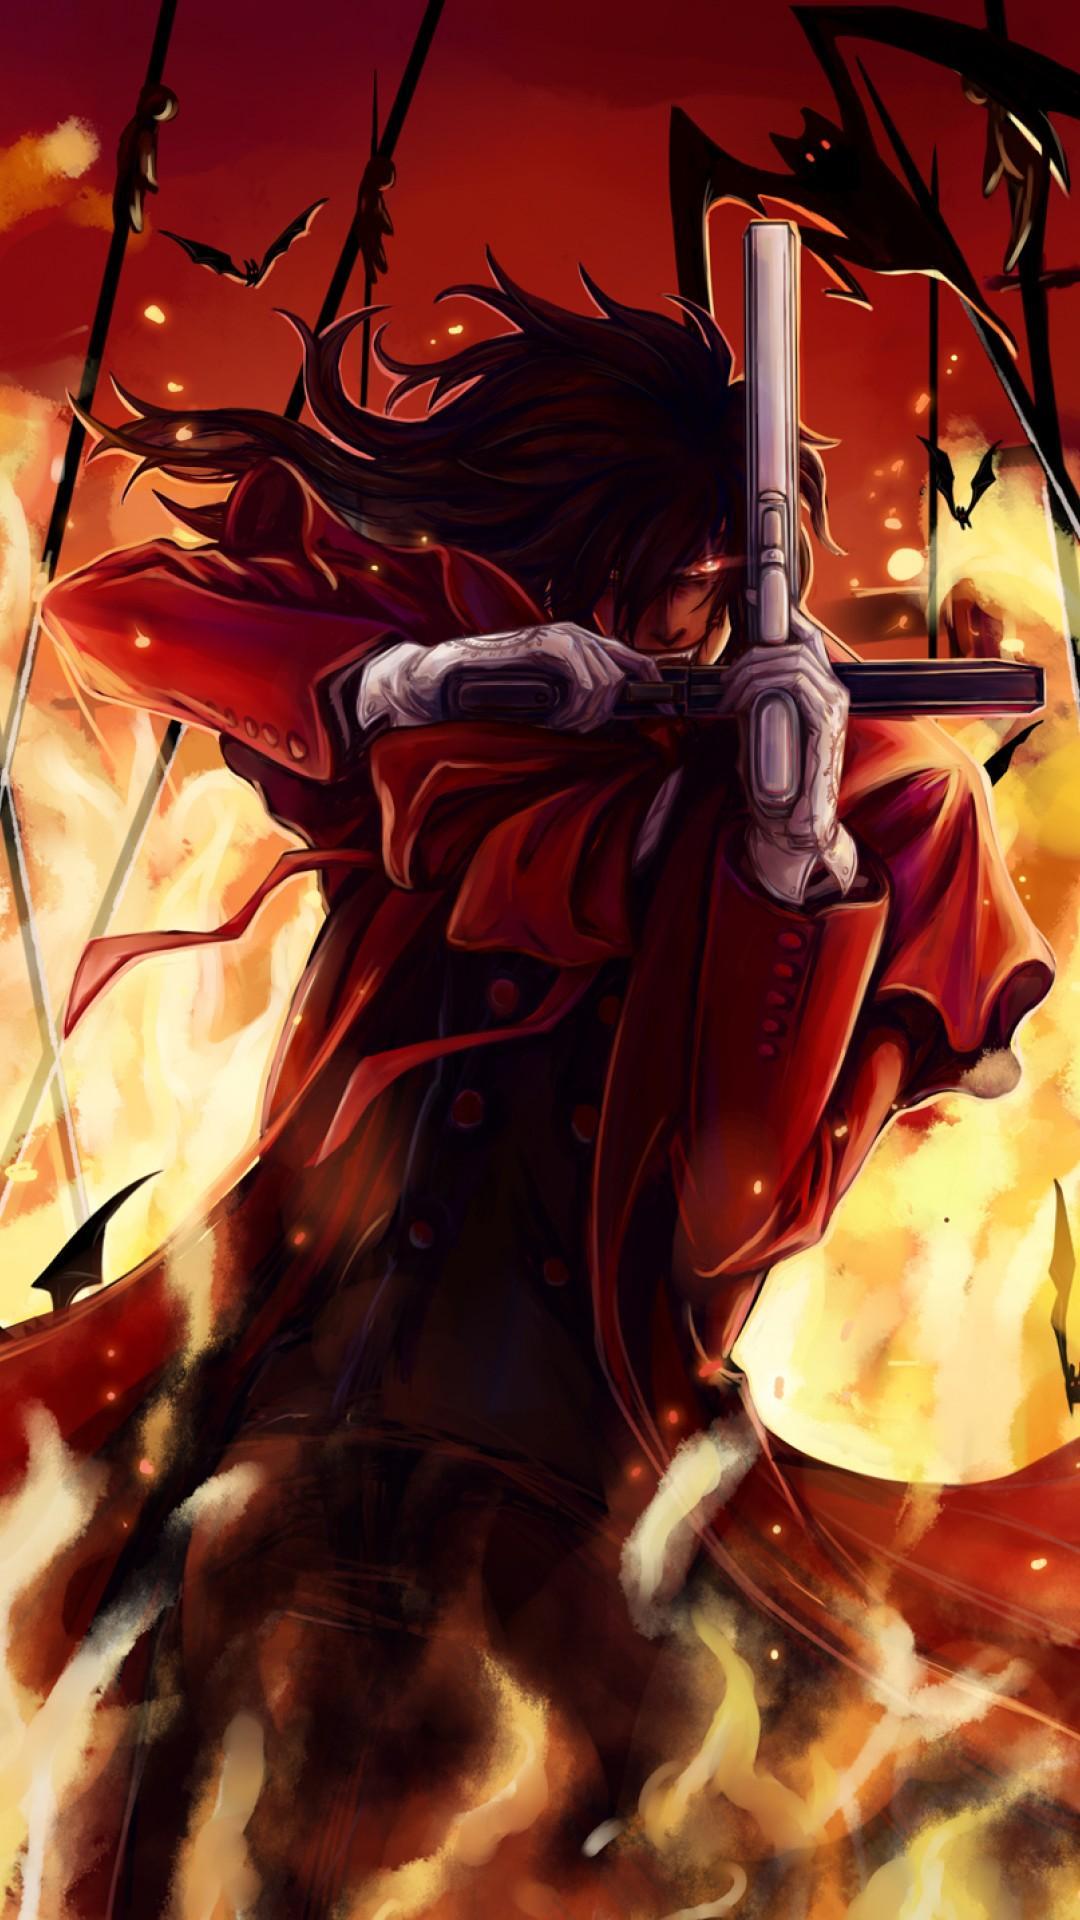 Alucard Hellsing Wallpaper Anime For Android Apk Download